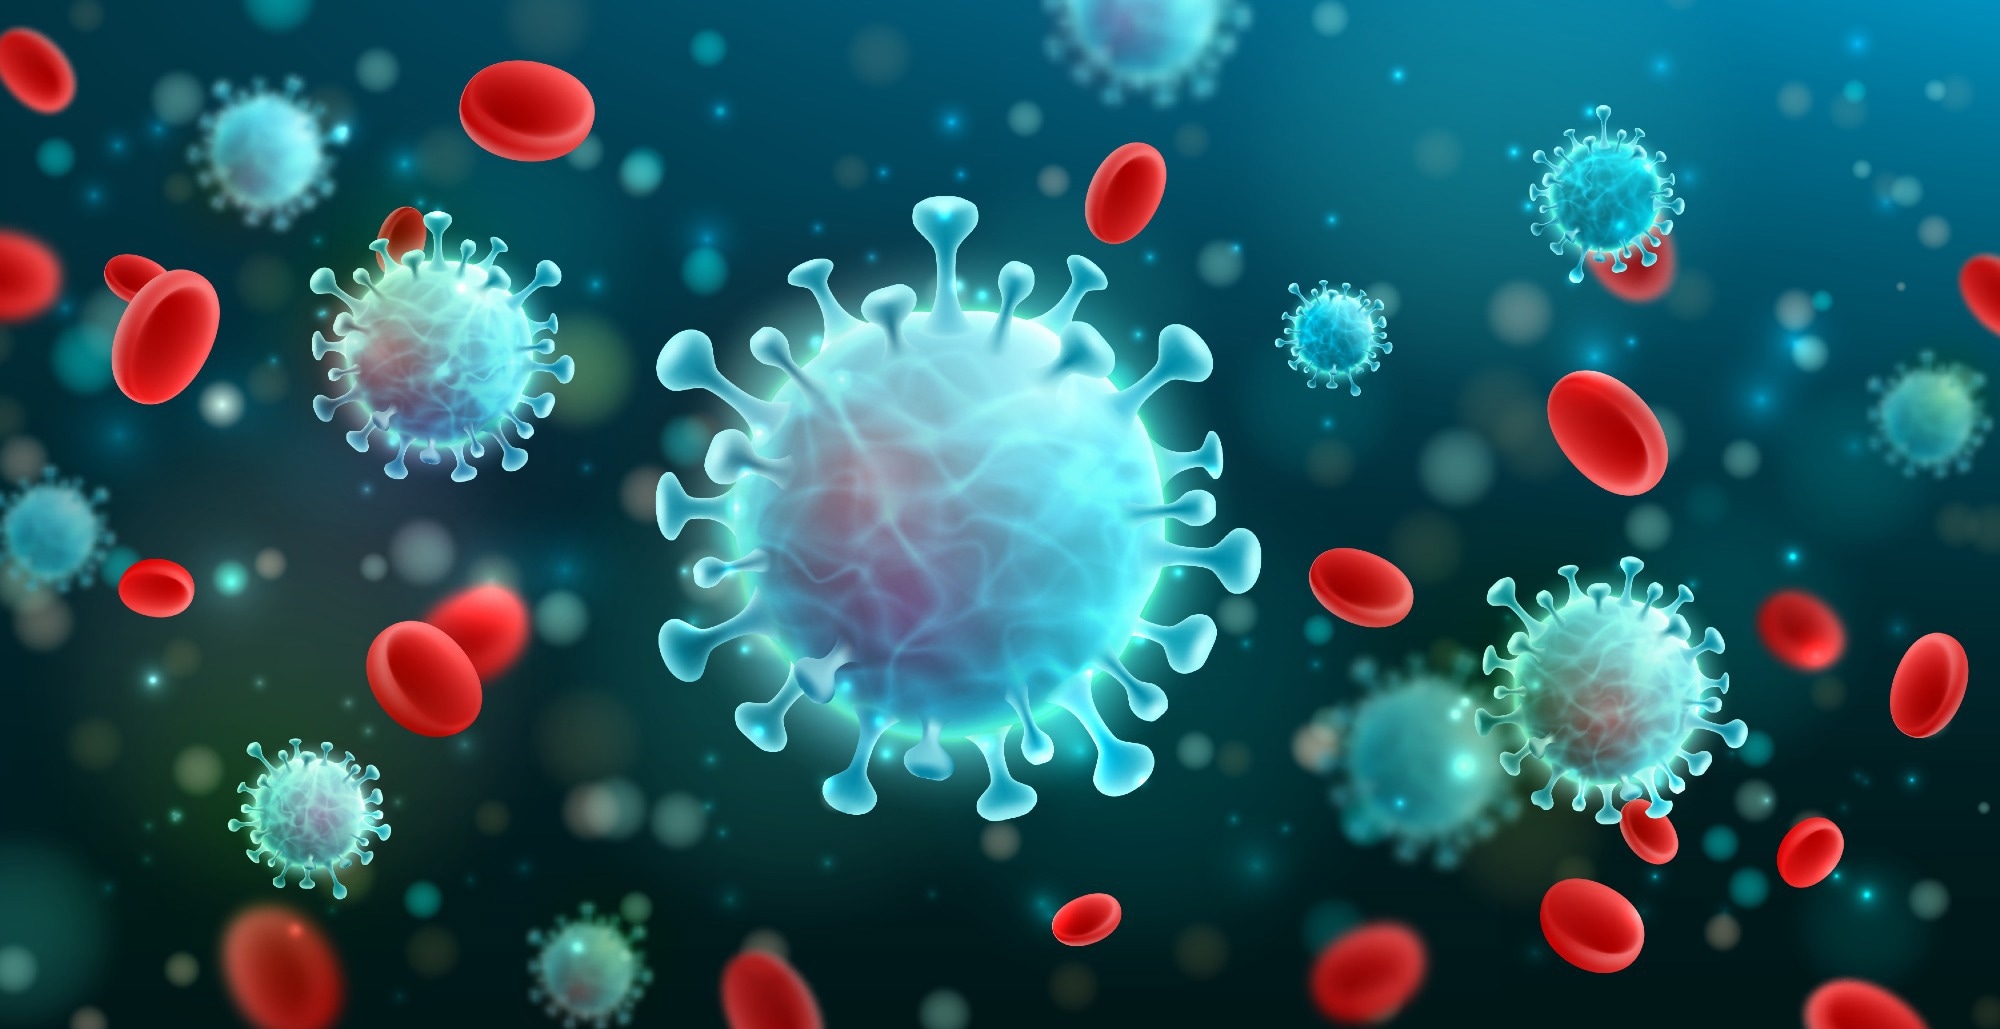 Study: Binding and neutralizing IgG responses to SARS-CoV-2 after natural infection or vaccination. Image Credit: Fotomay/Shutterstock